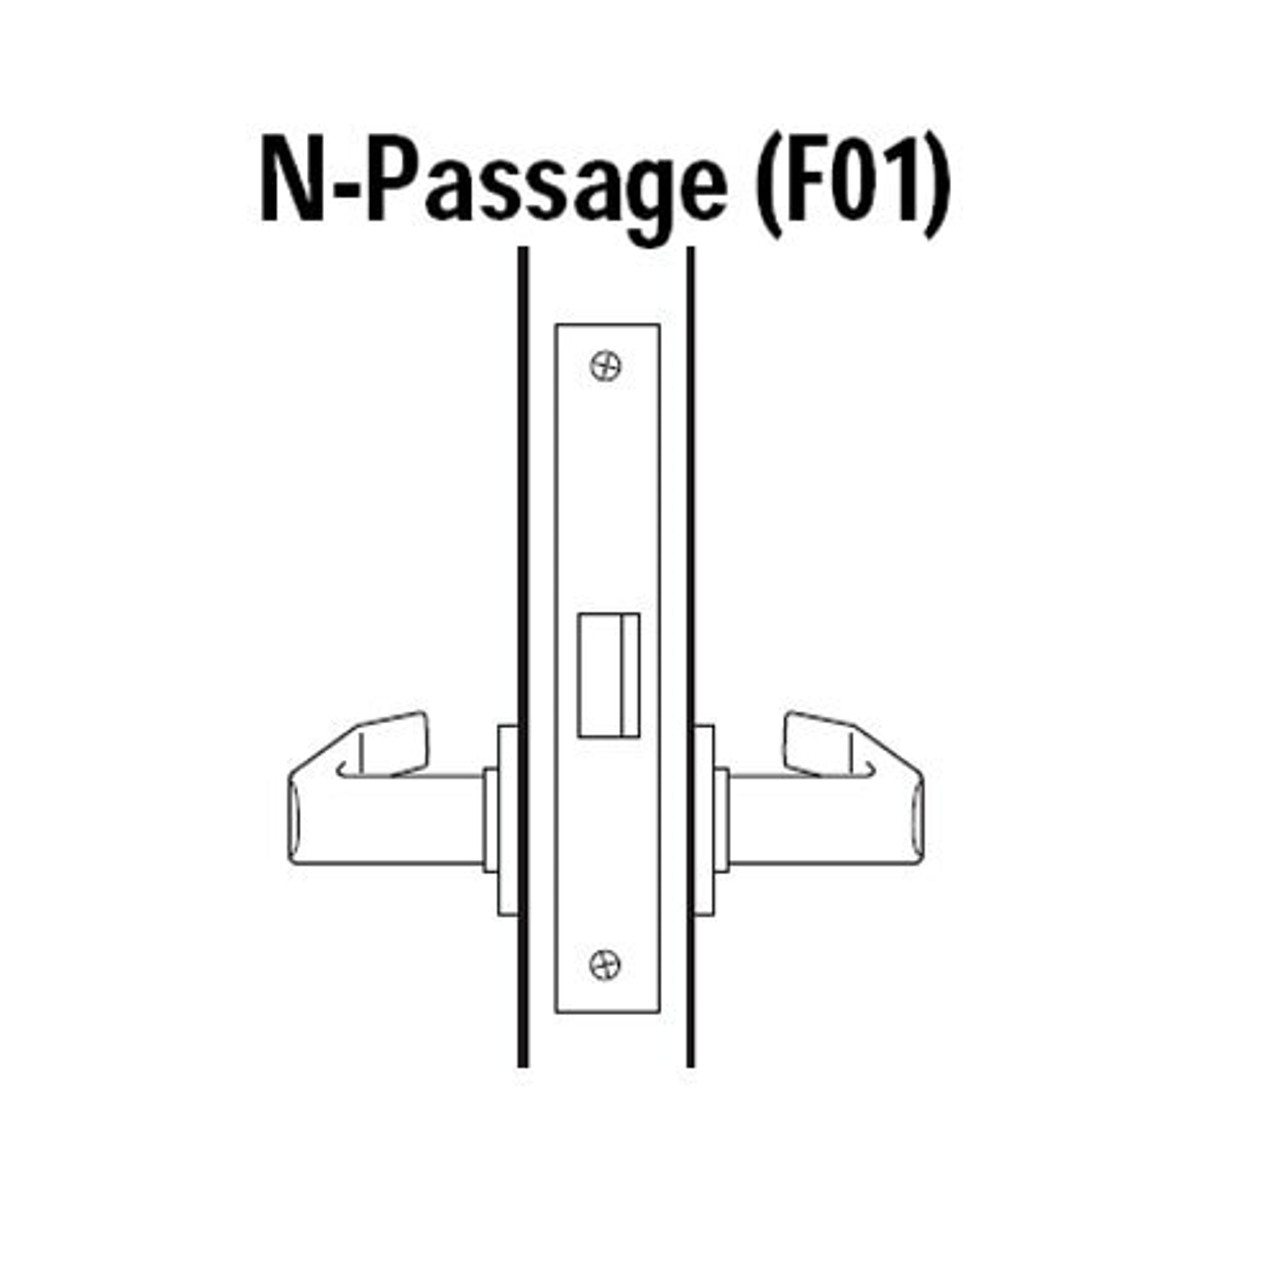 45H0N15J606 Best 40H Series Passage Heavy Duty Mortise Lever Lock with Contour with Angle Return Style in Satin Brass